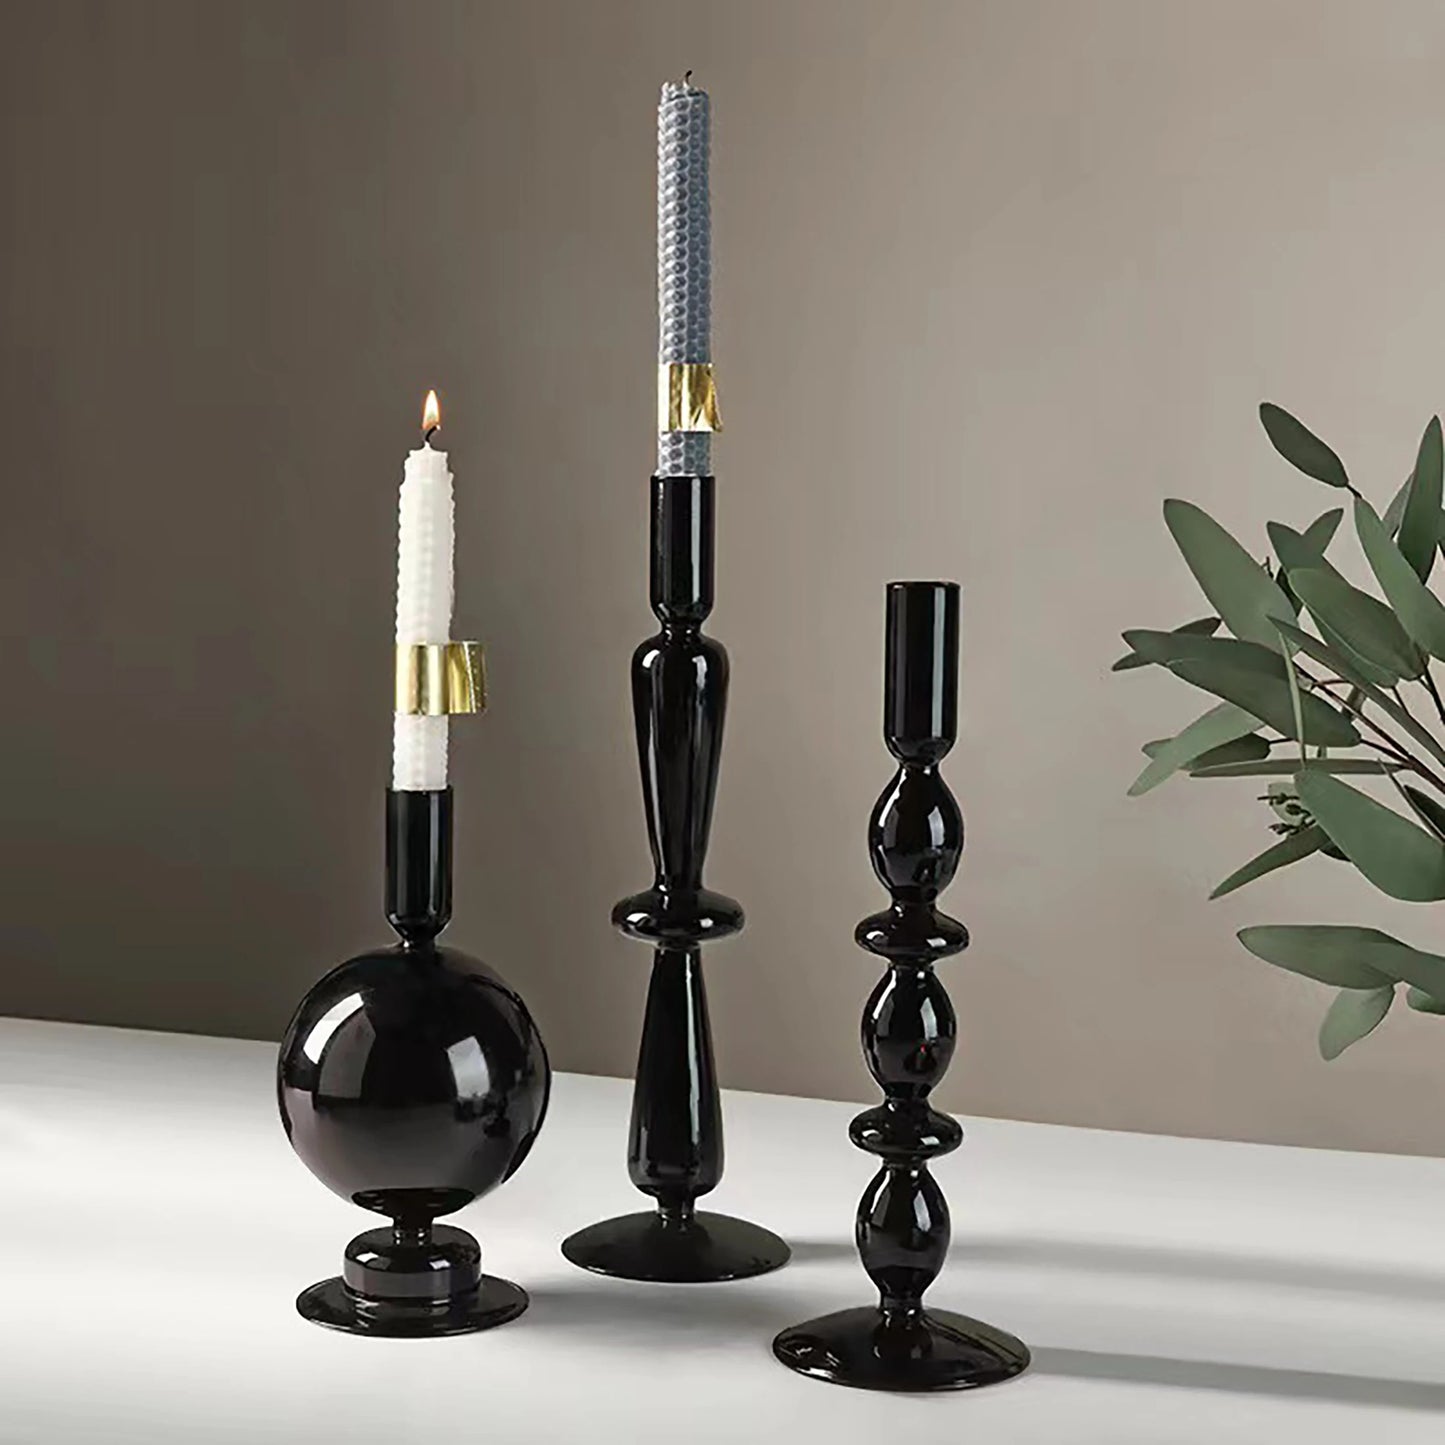 Black Modern Glass Candle Holders Choose From Our Exclusive Range To Find The Perfect Fit for Your Style.